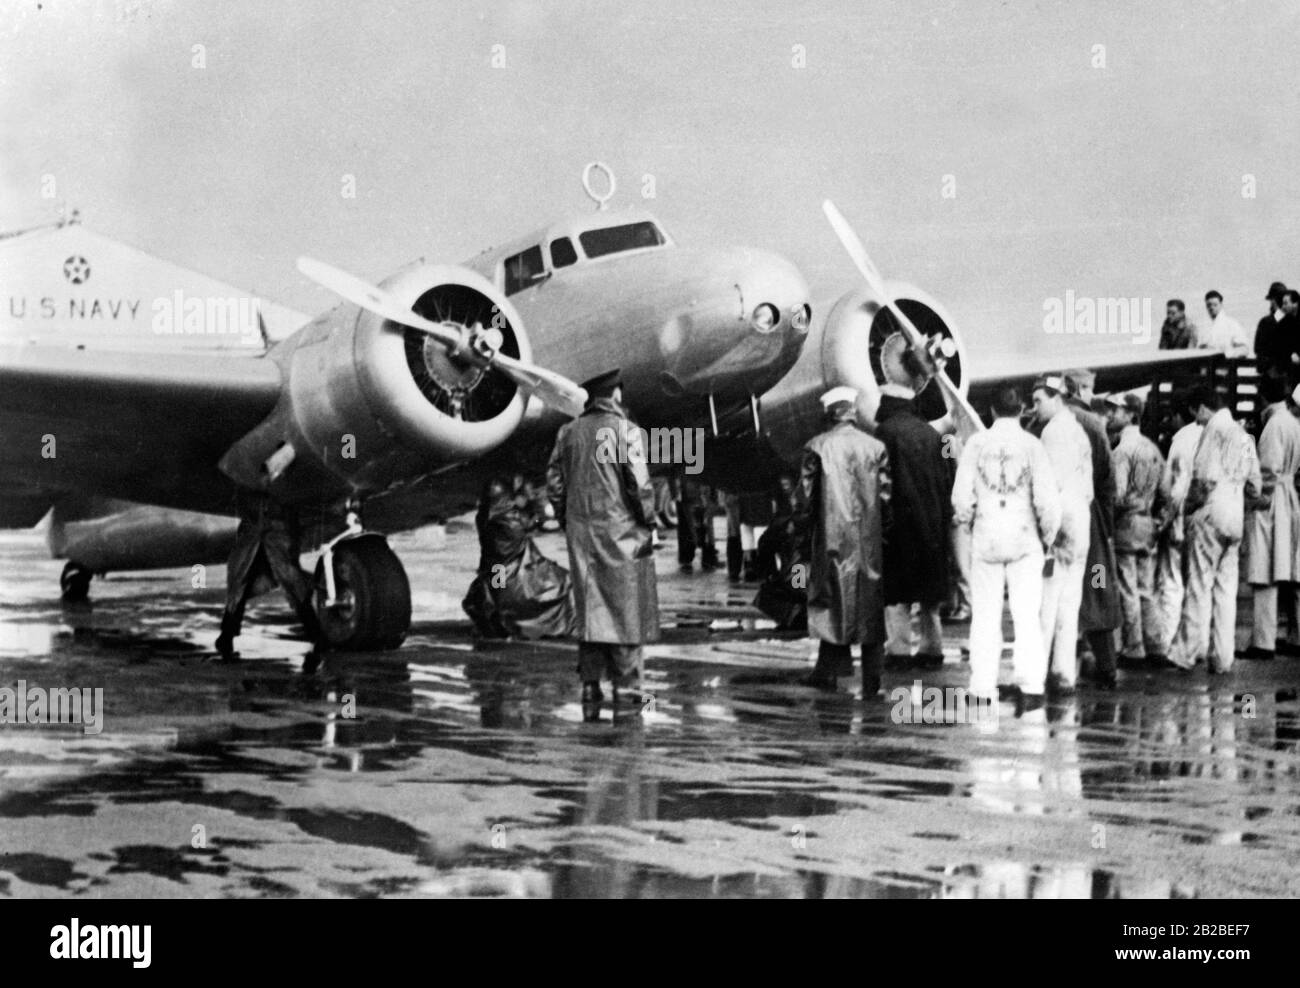 Amelia Earhart's plane, a twin-motored Lockheed Electra, gets complete checking by the crew of Cakland Airport in Amamada, California, before her take-off on her last flight around the world. Stock Photo